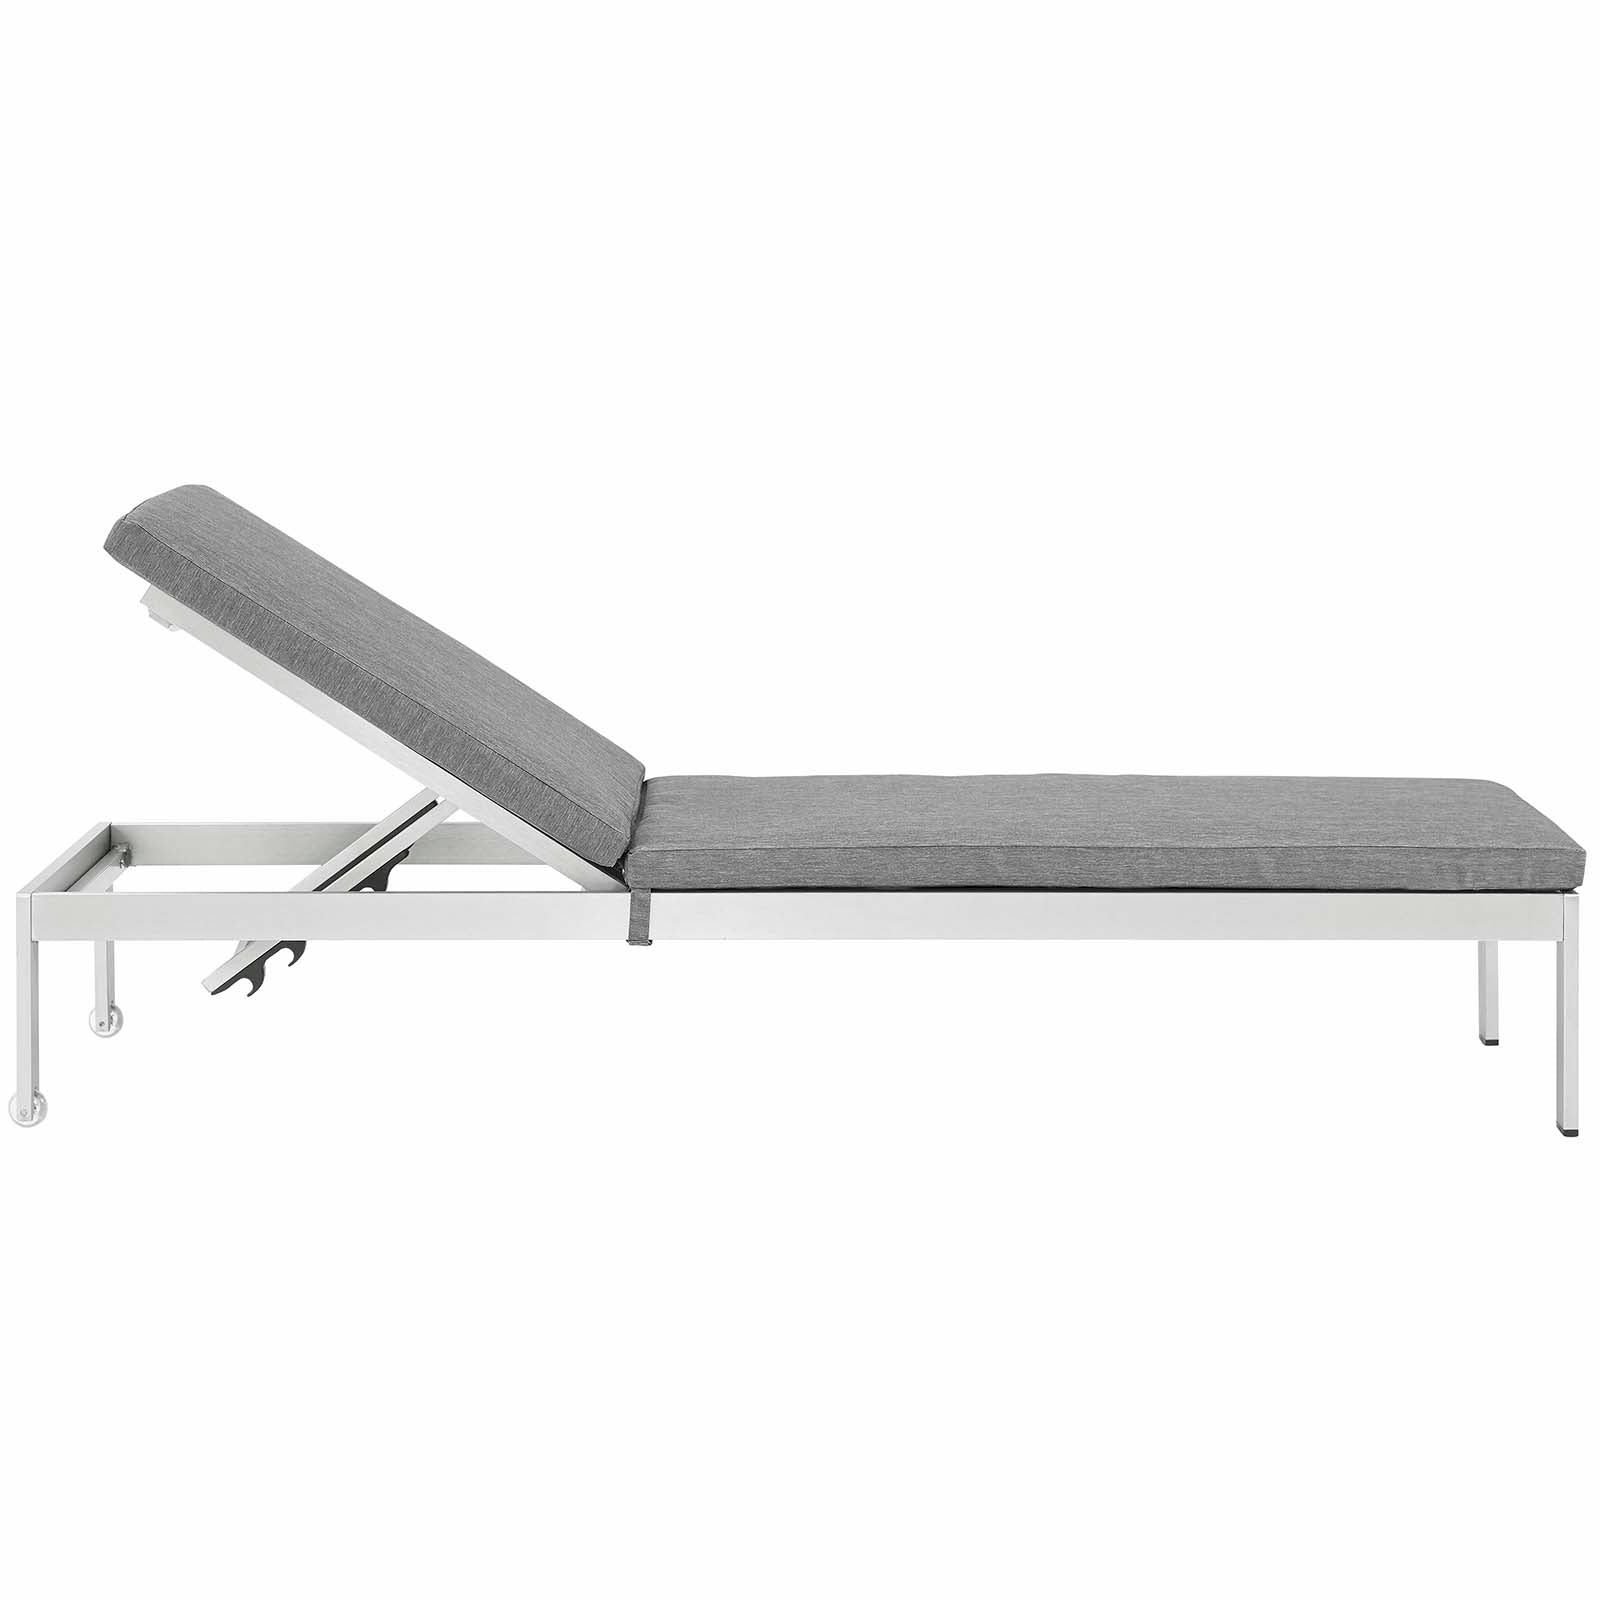 Modway - Shore Chaise with Cushions Outdoor Patio Aluminum Set of 4 - EEI-2738